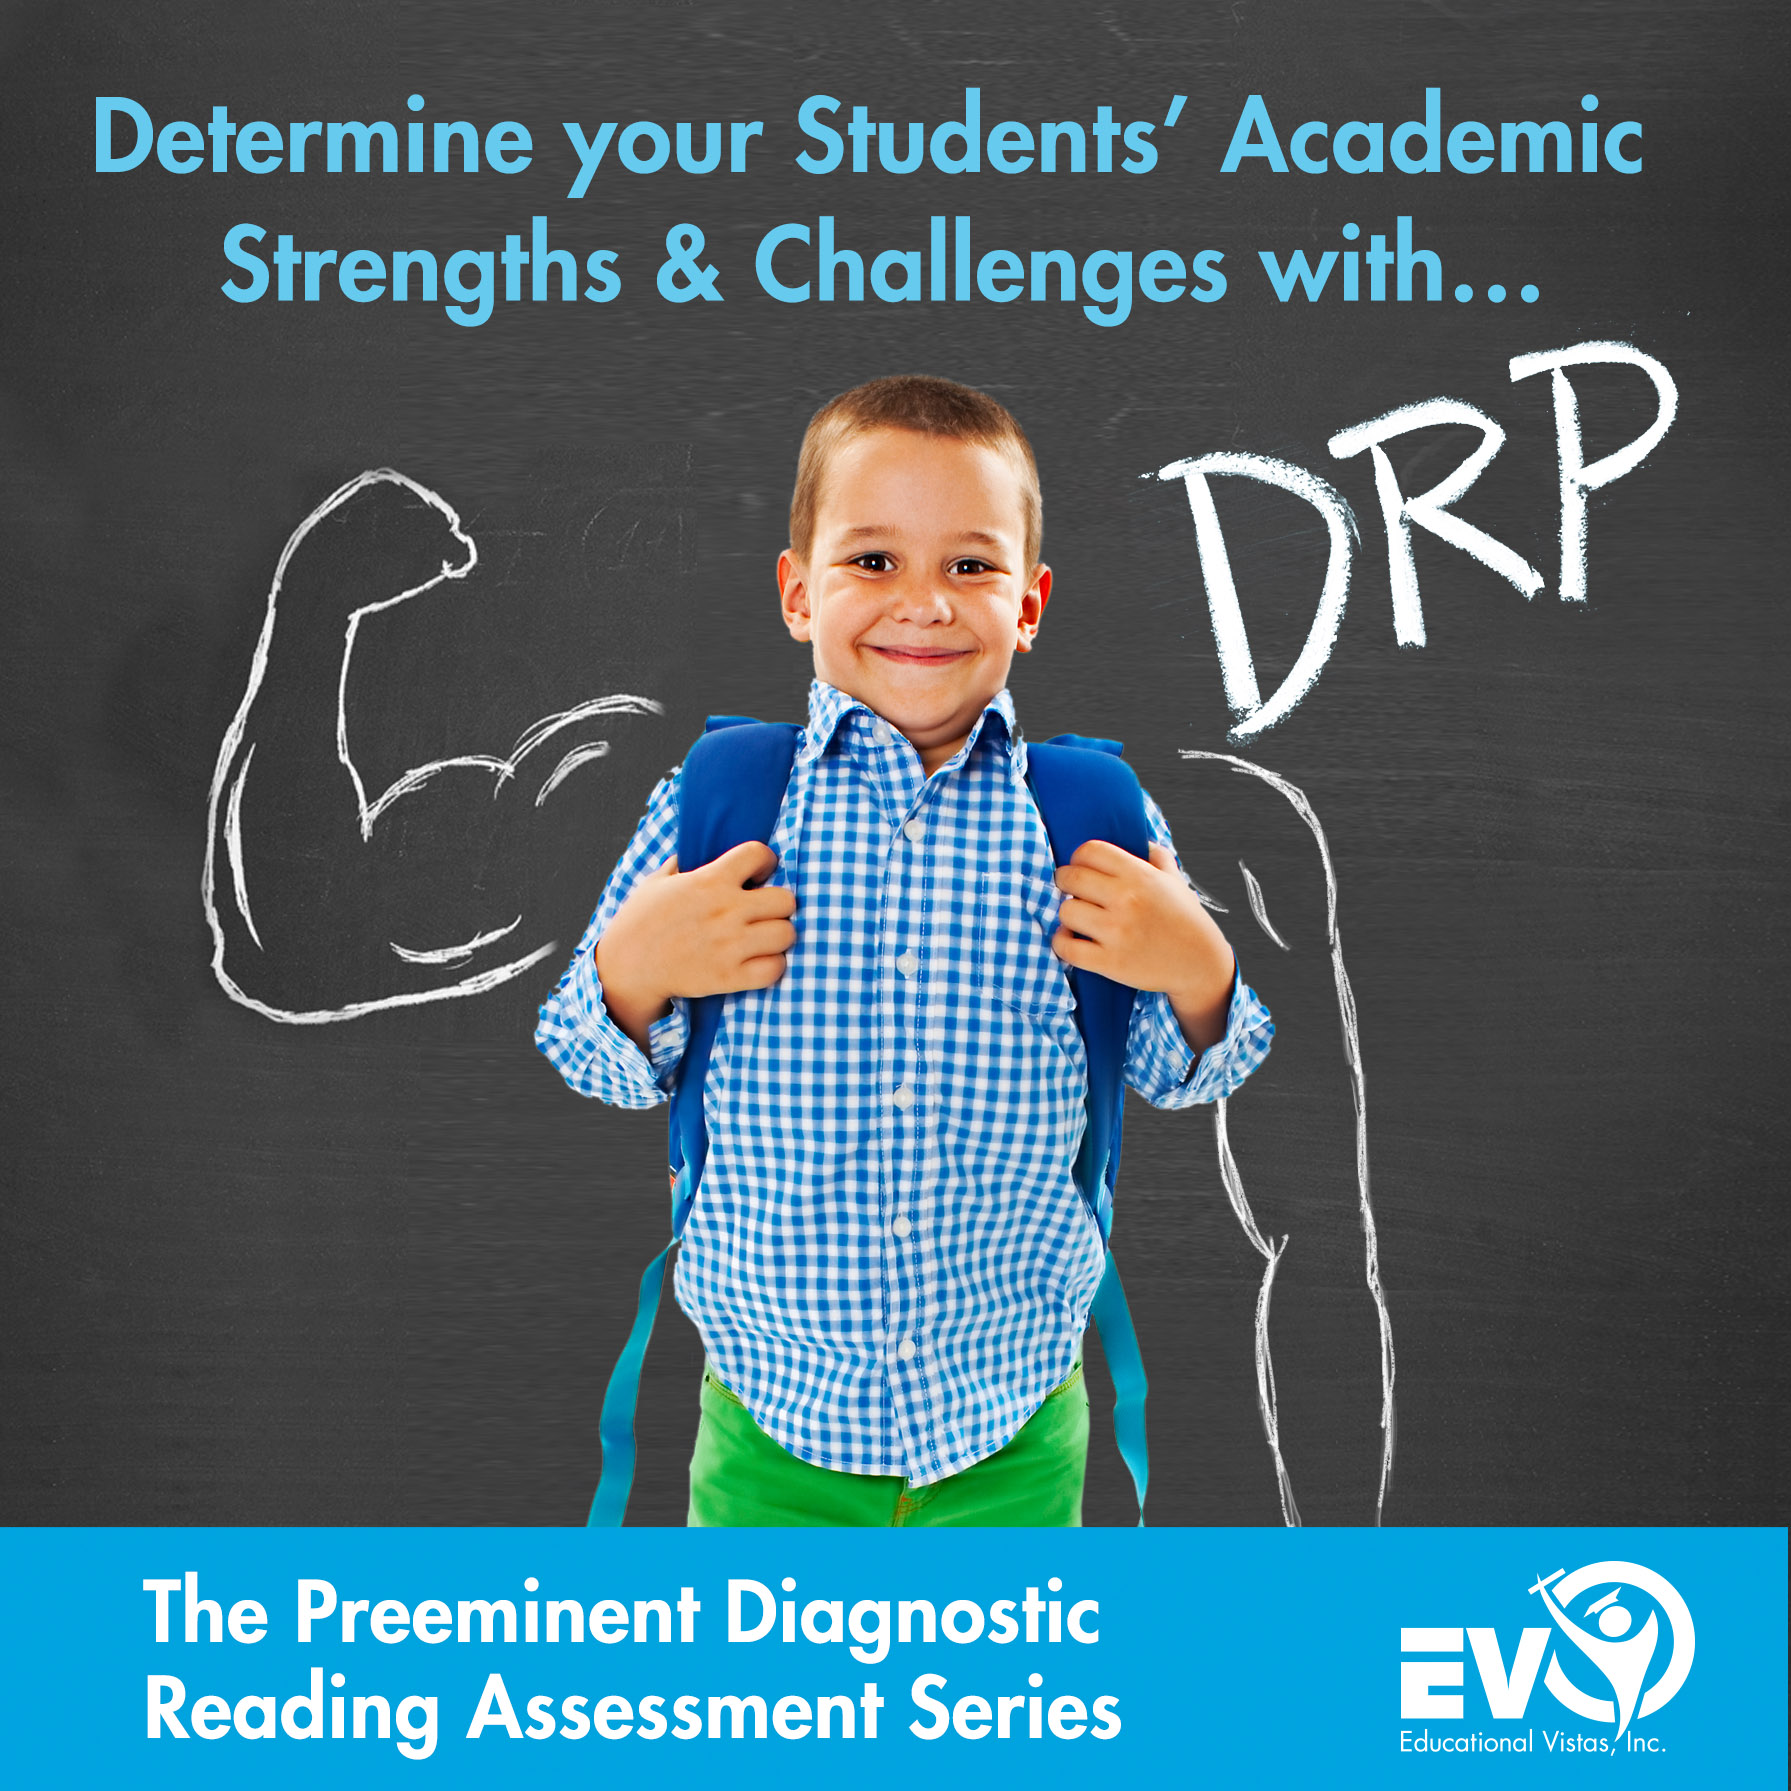 Determine your Student's Academic Strengths & Challenges with DRP. The preeminent Diagnotstic Reading Assessment Series.